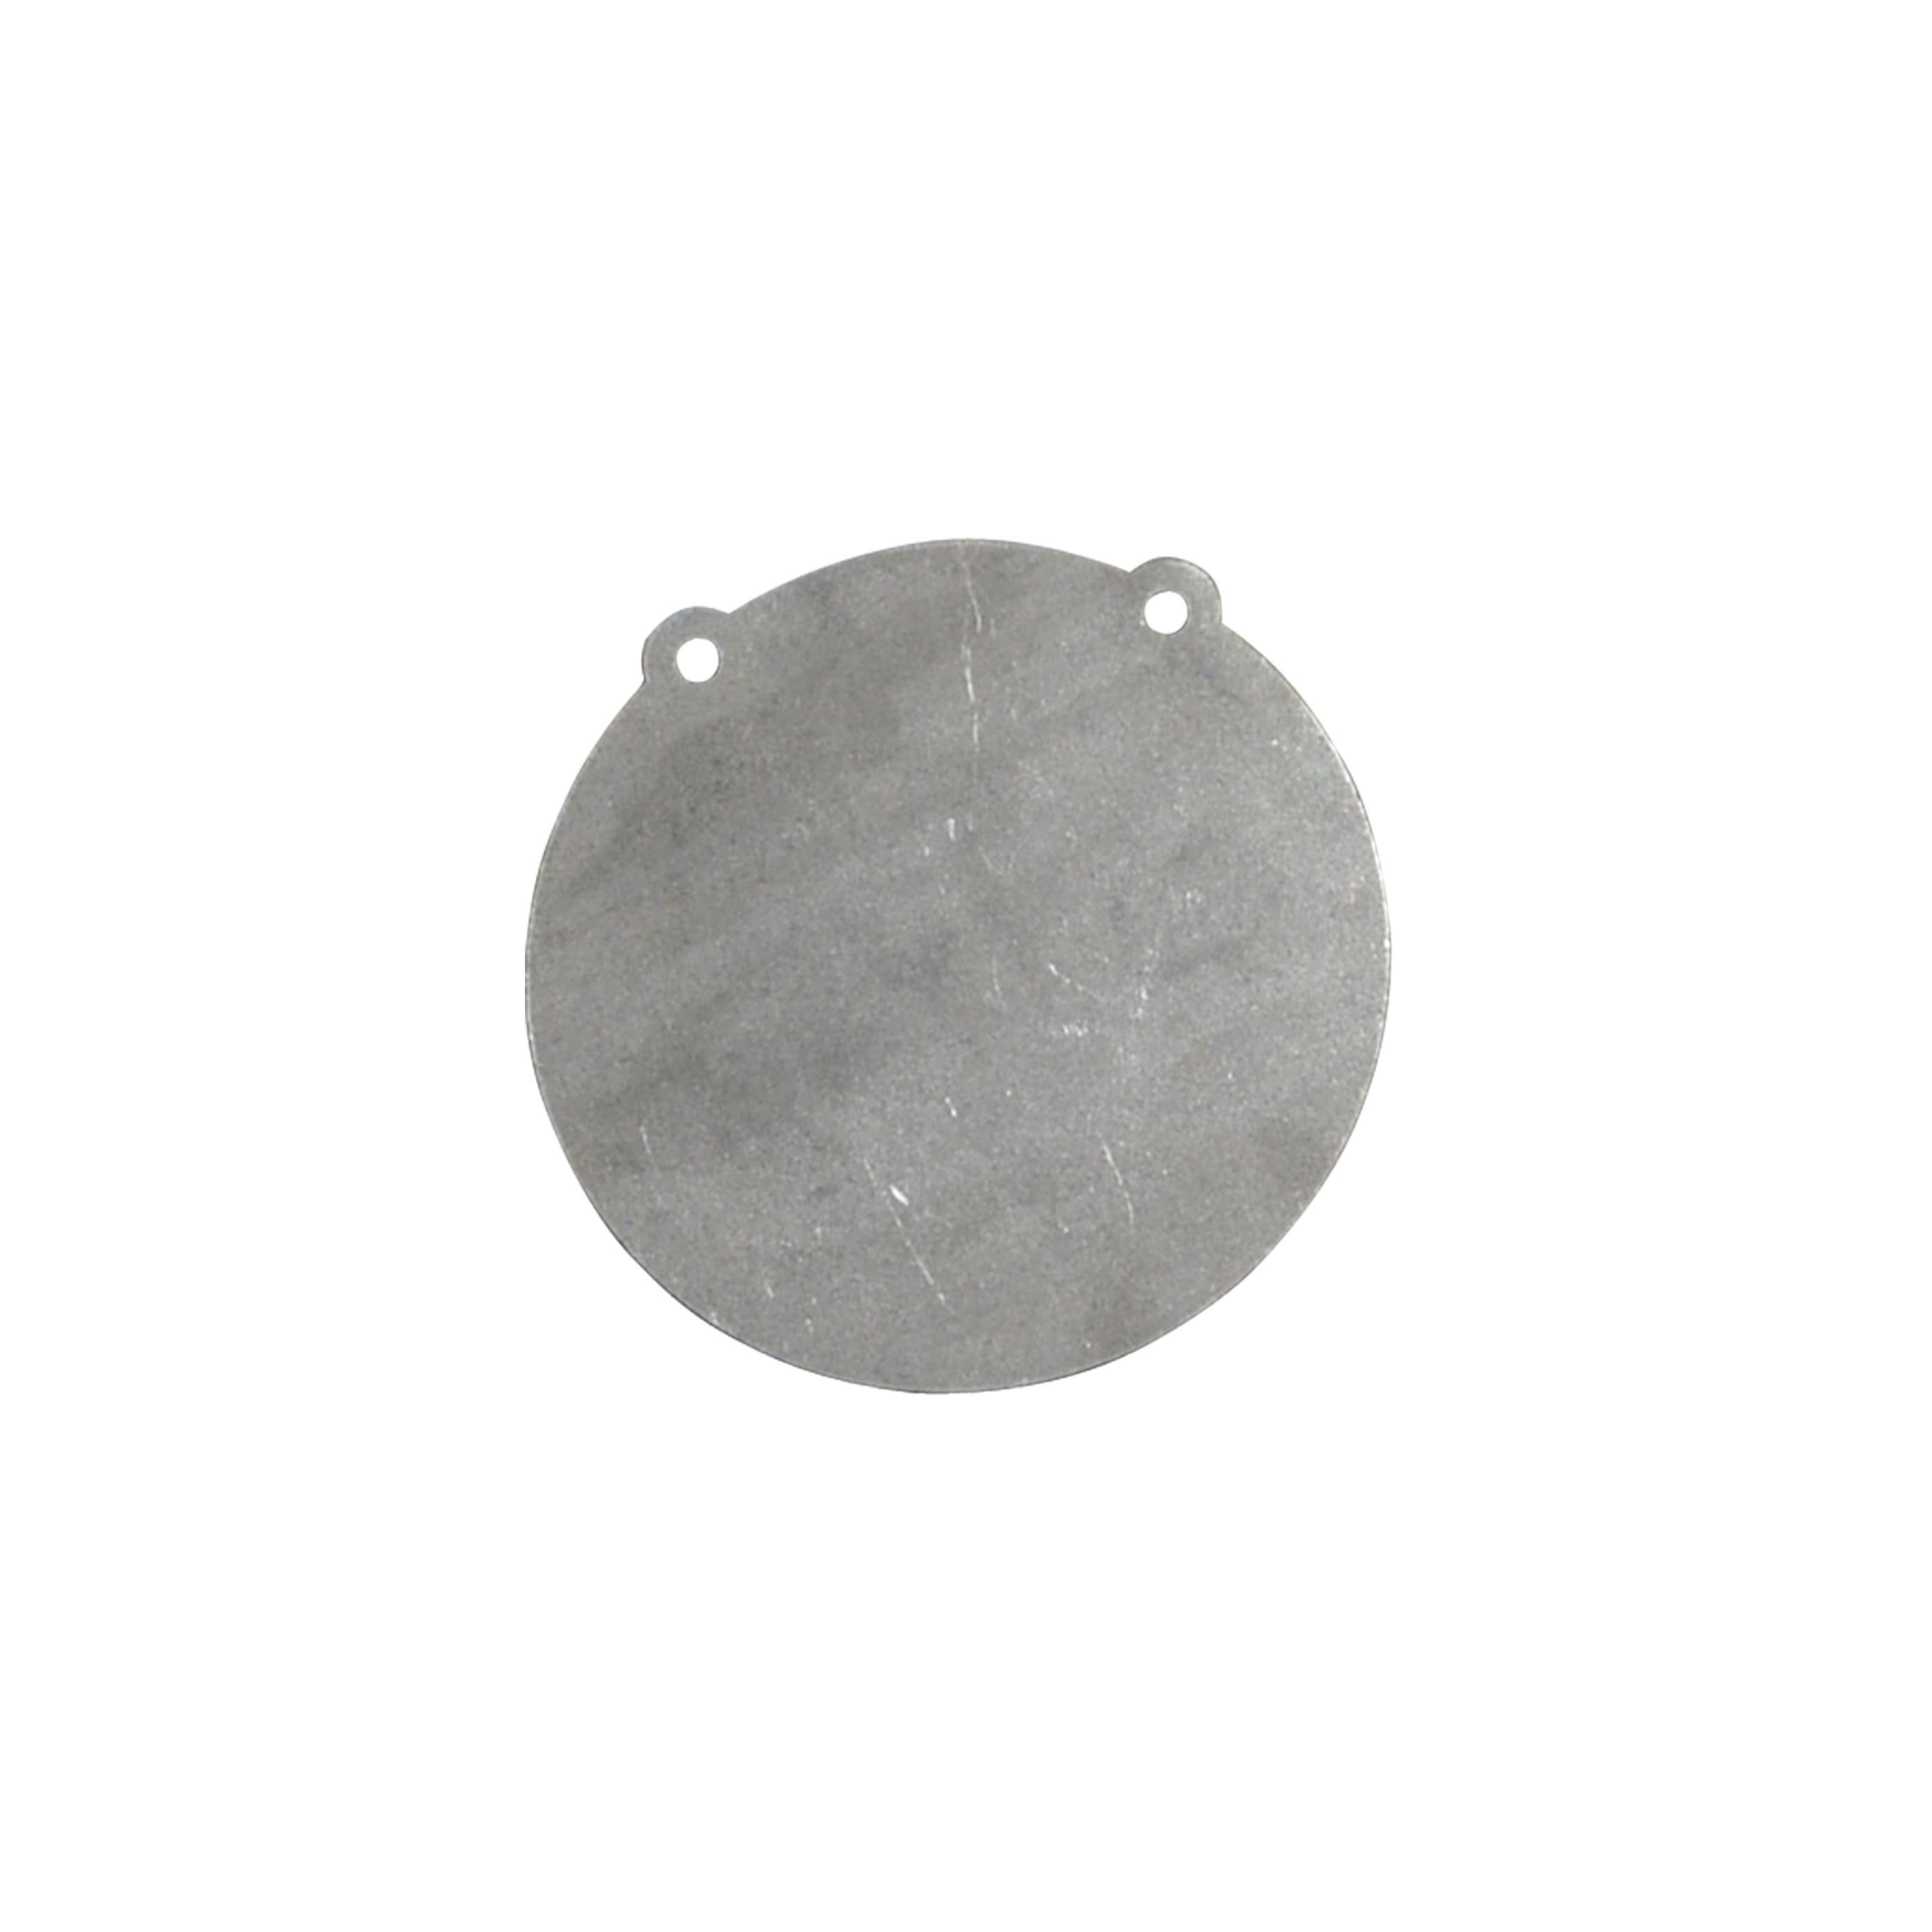 >LOW COST SHIPPING< AR500 Steel Targets 2 Inch Gongs 1/2 Inch Thick 4 Pack 